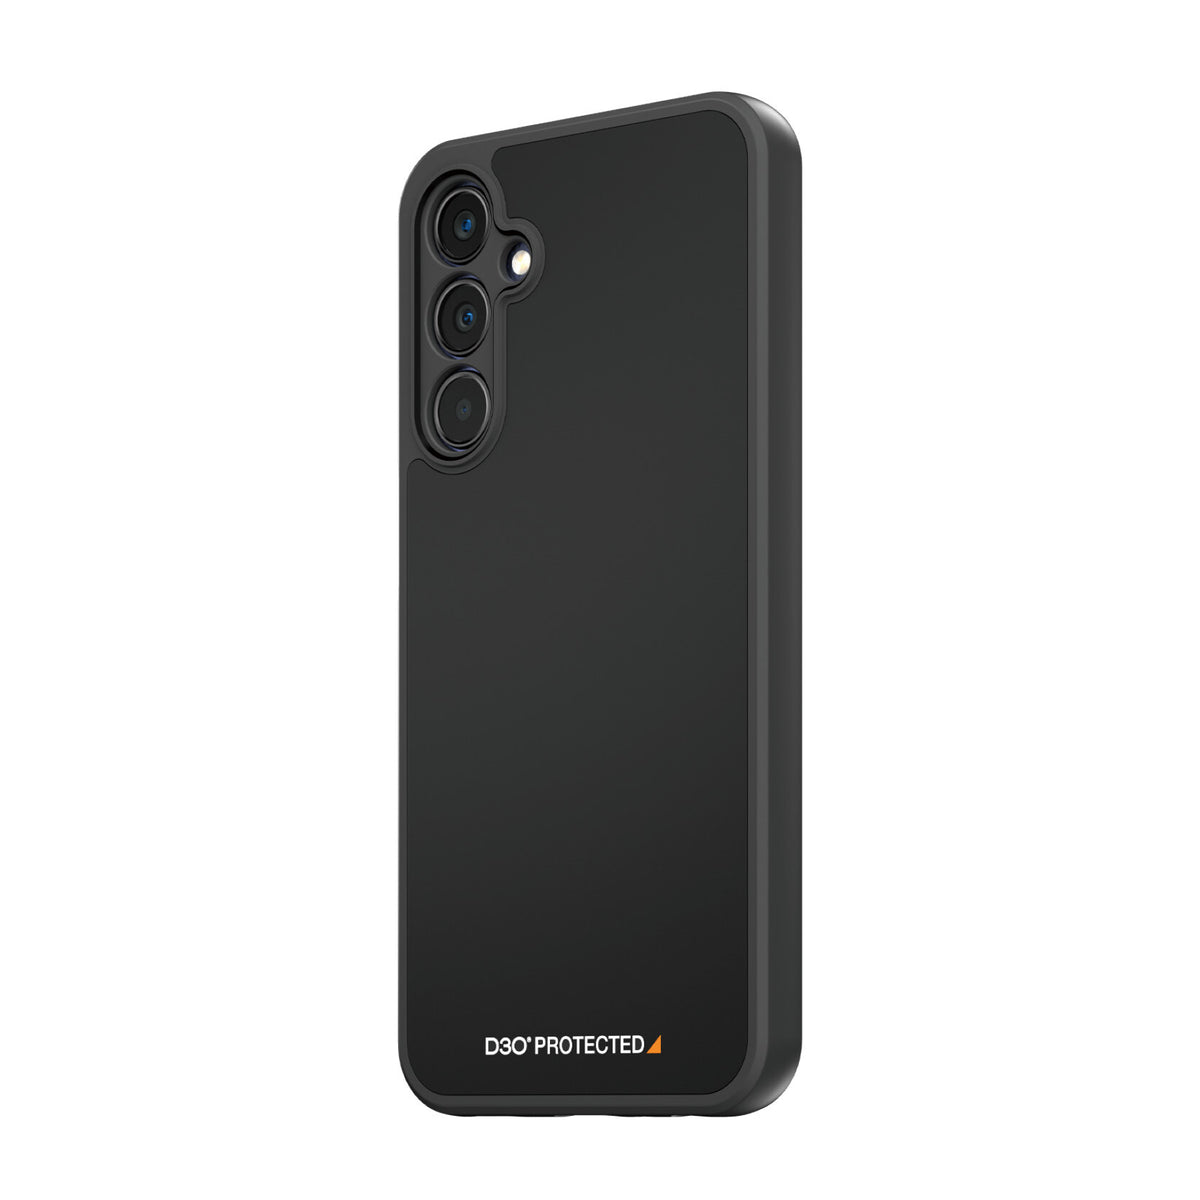 PanzerGlass ® HardCase with D3O for Galaxy A25 (5G) in Black